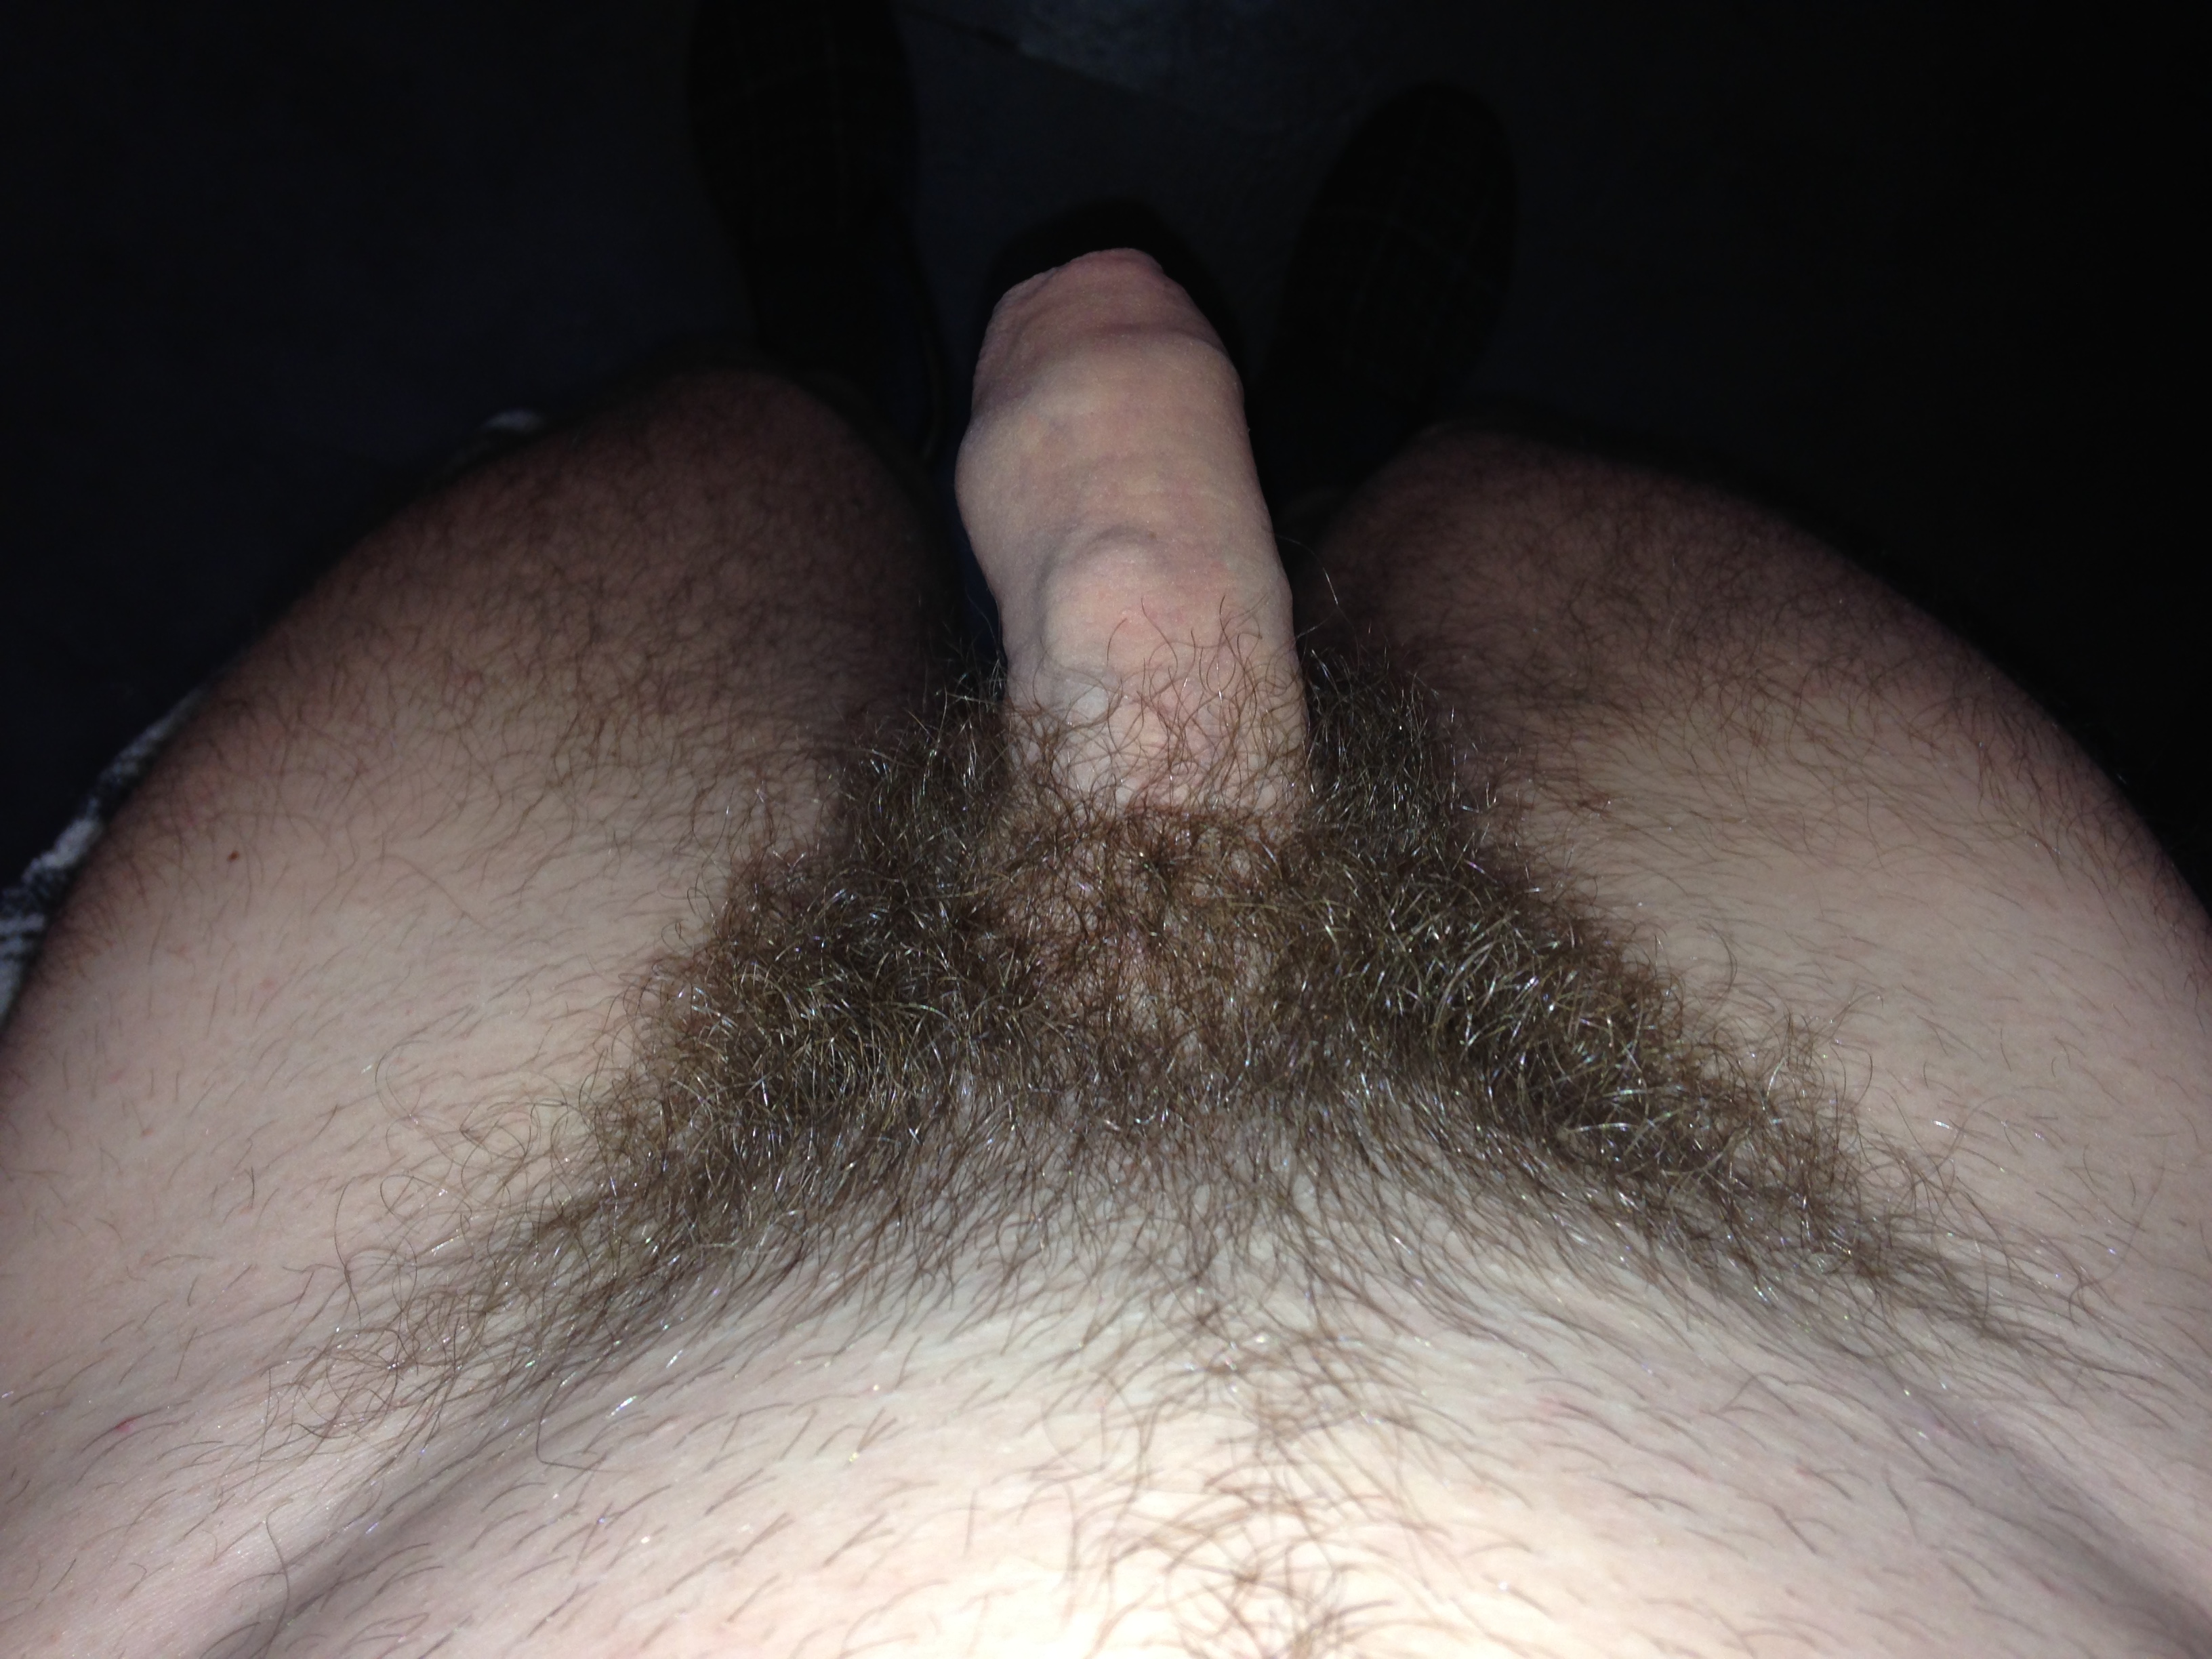 Shaving his bush off with a beardtrimmer